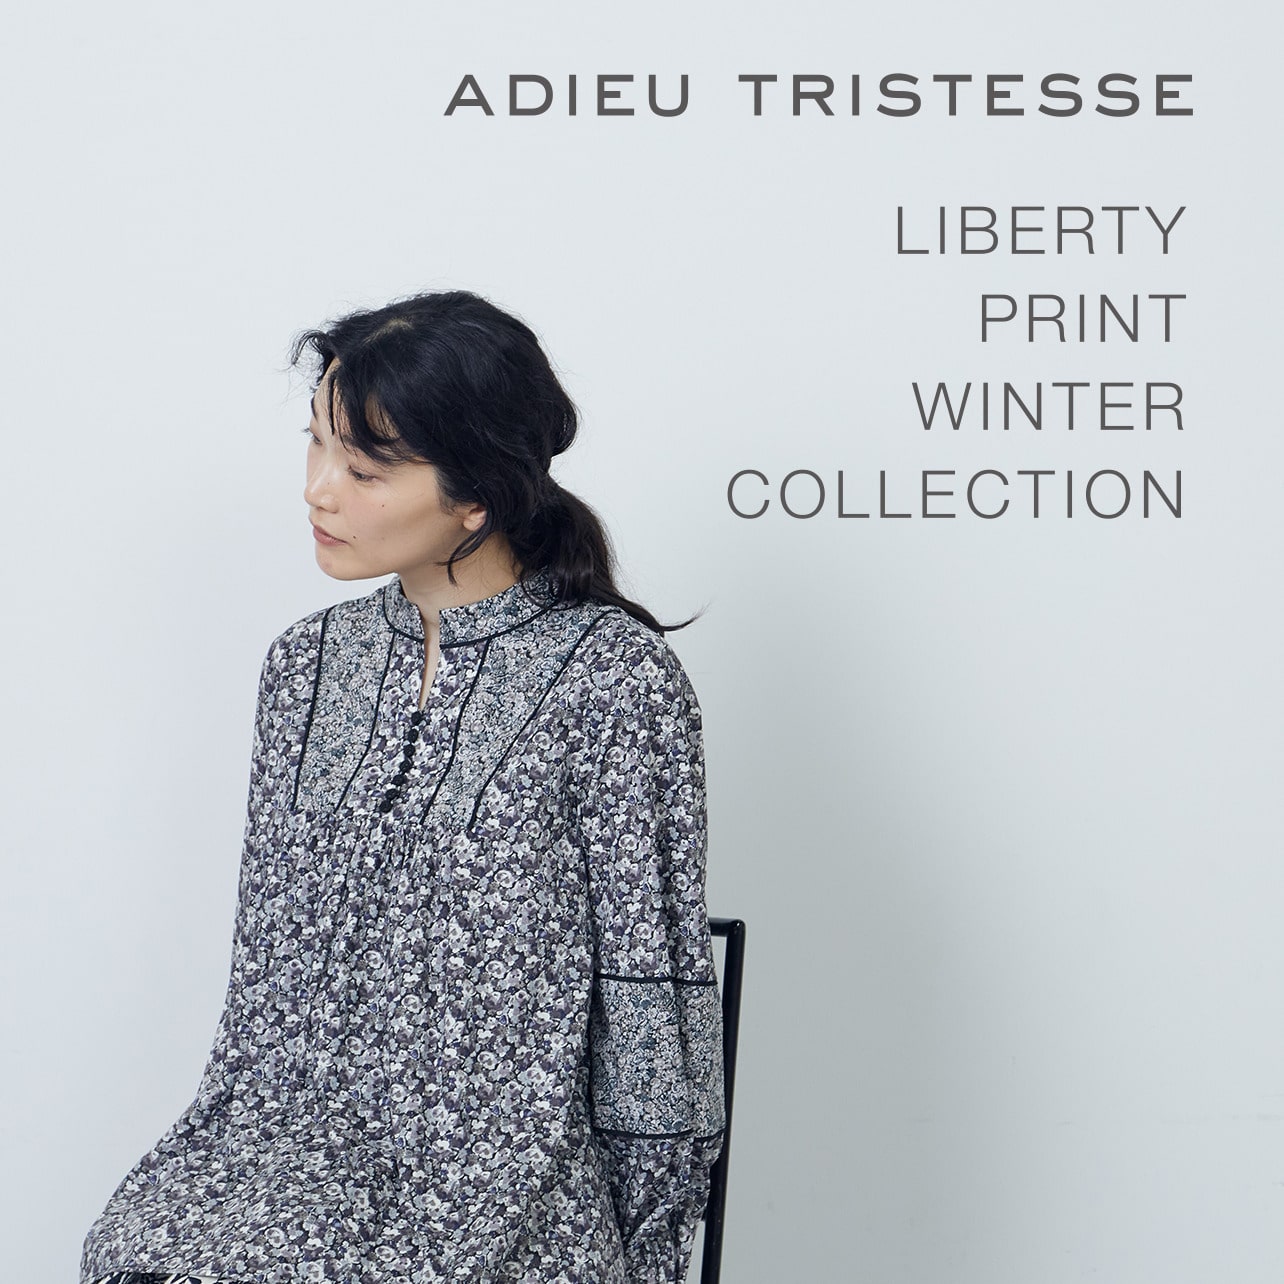 LIBERTY PRINT WINTER COLLECTION